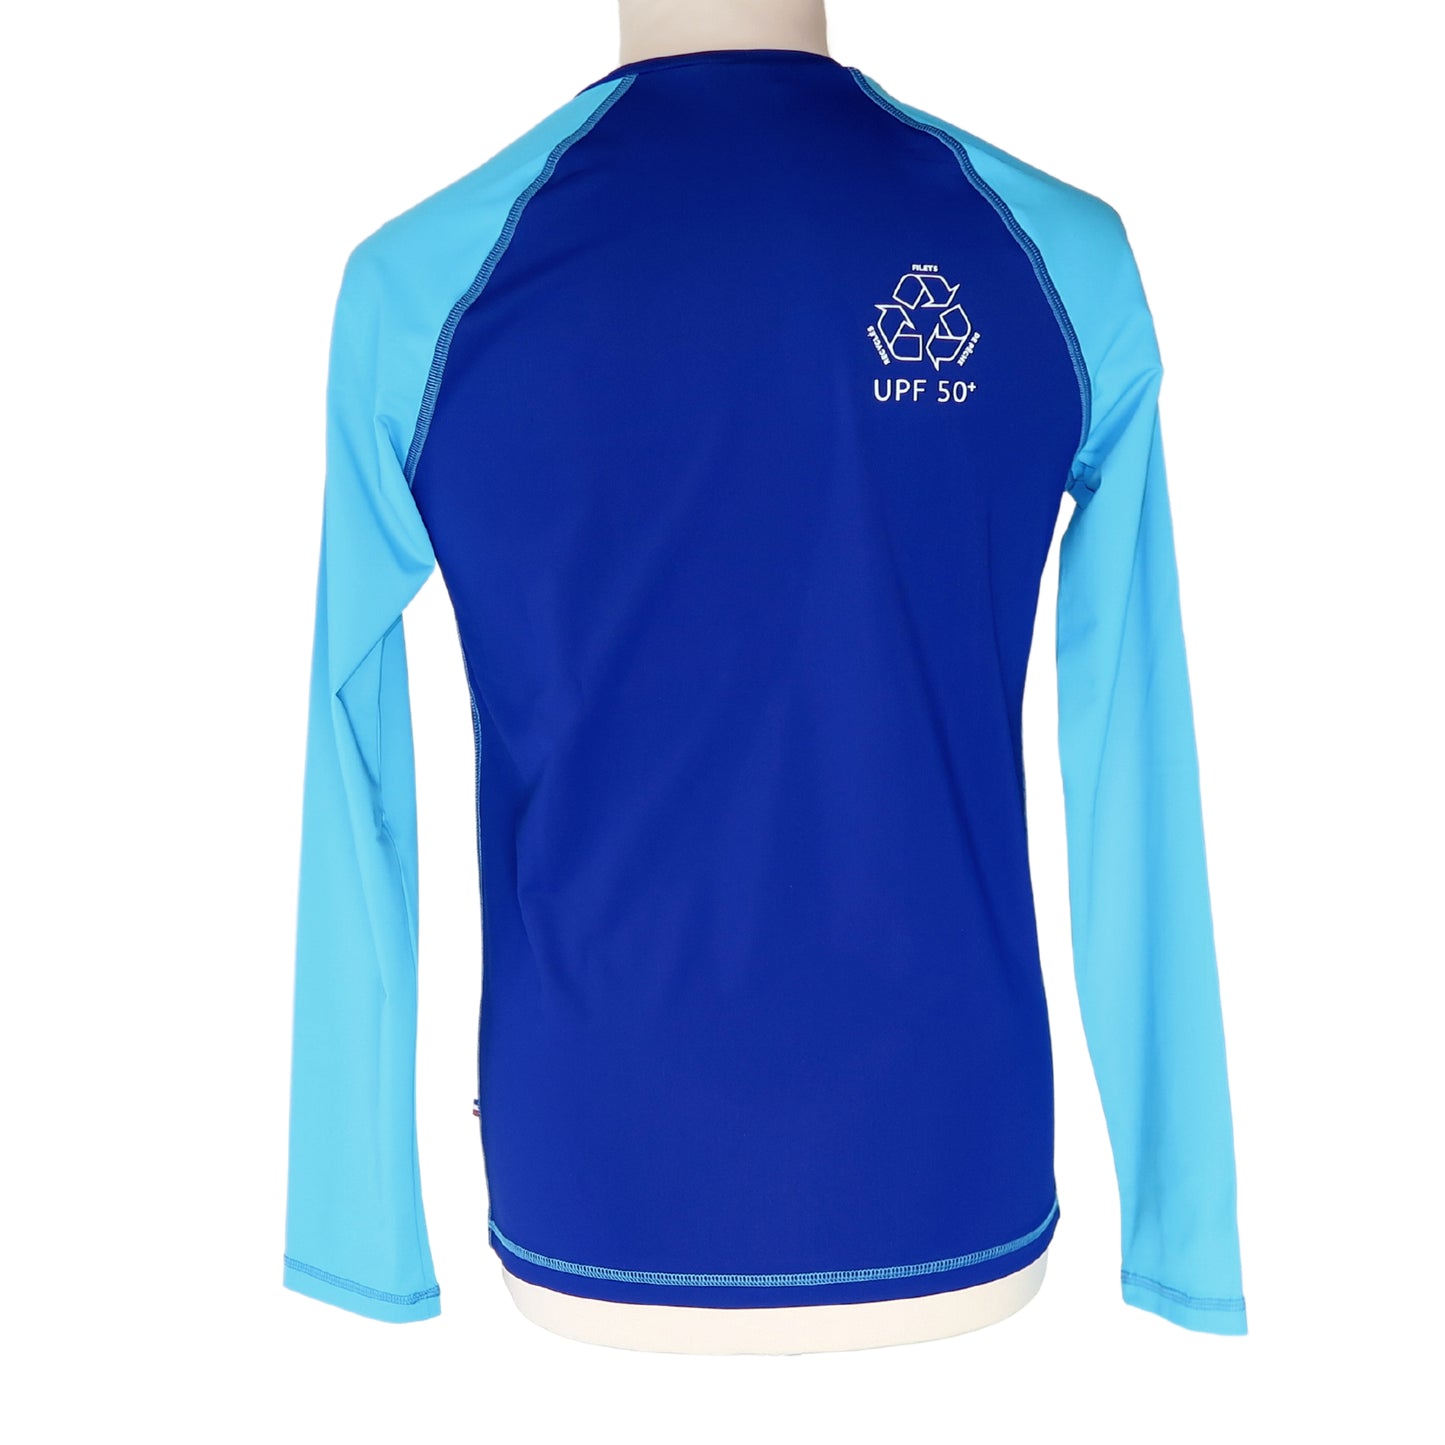 Men blue rashguard made in France from ghostnets with marine animal